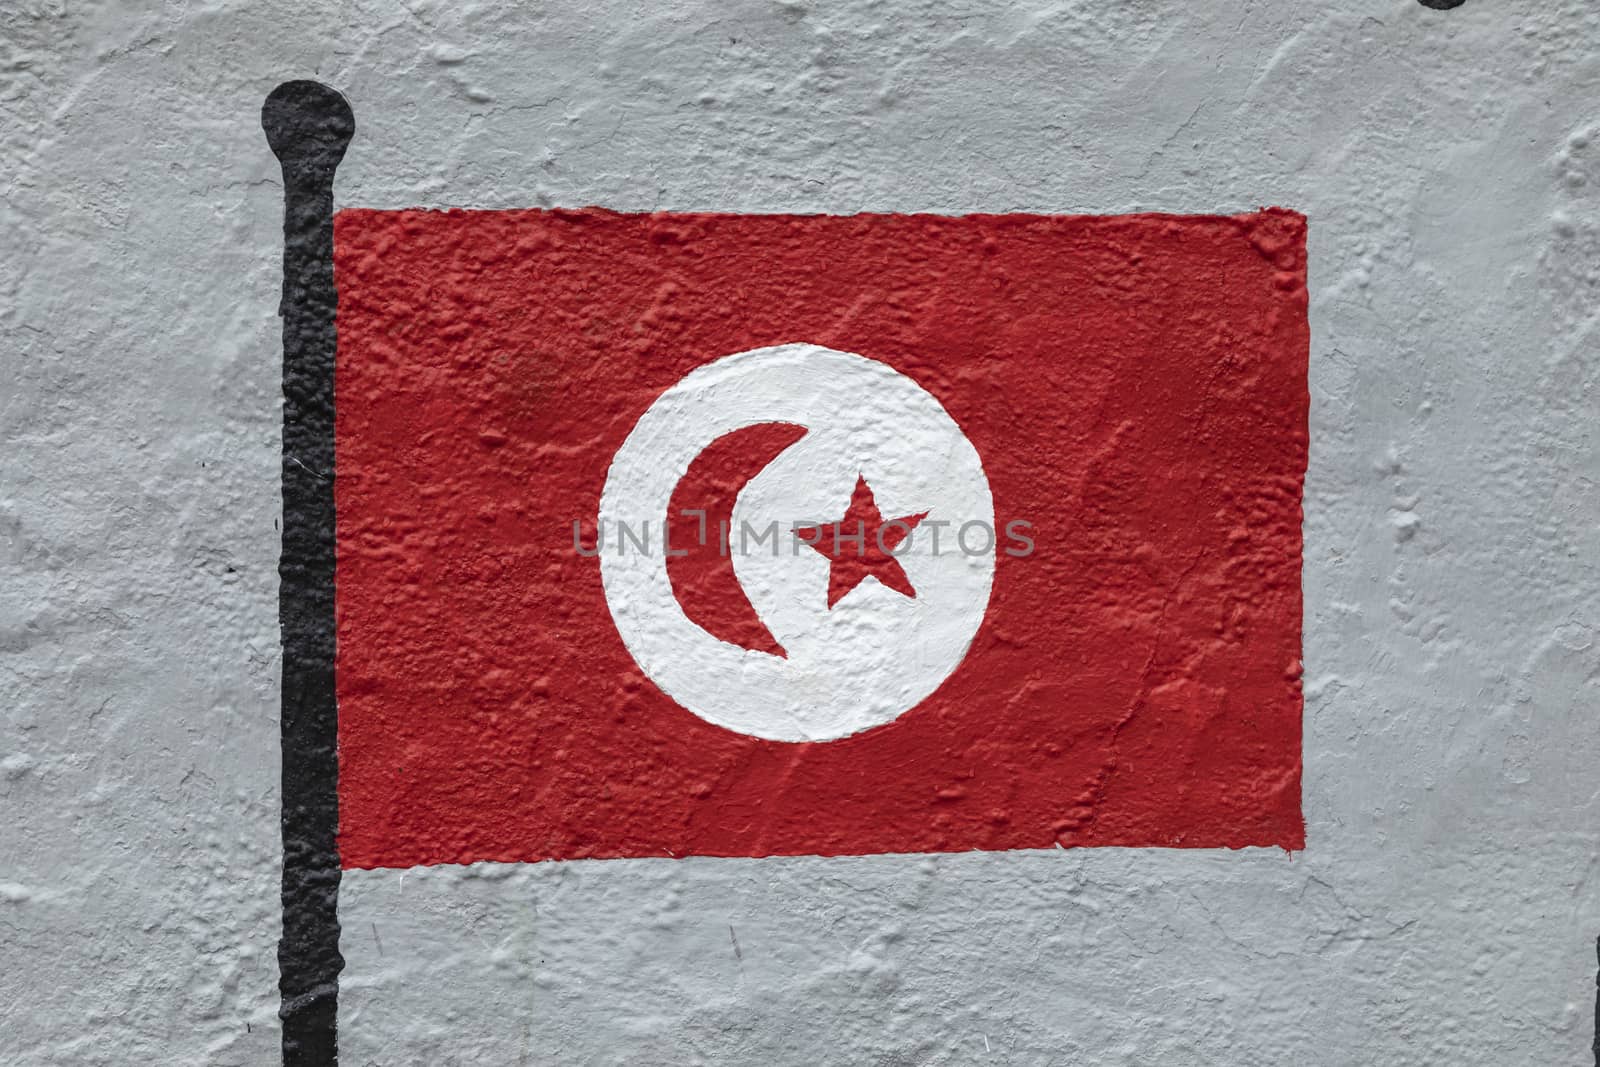 Childish style drawing, of the flag of Tunisia, painted on a wall.